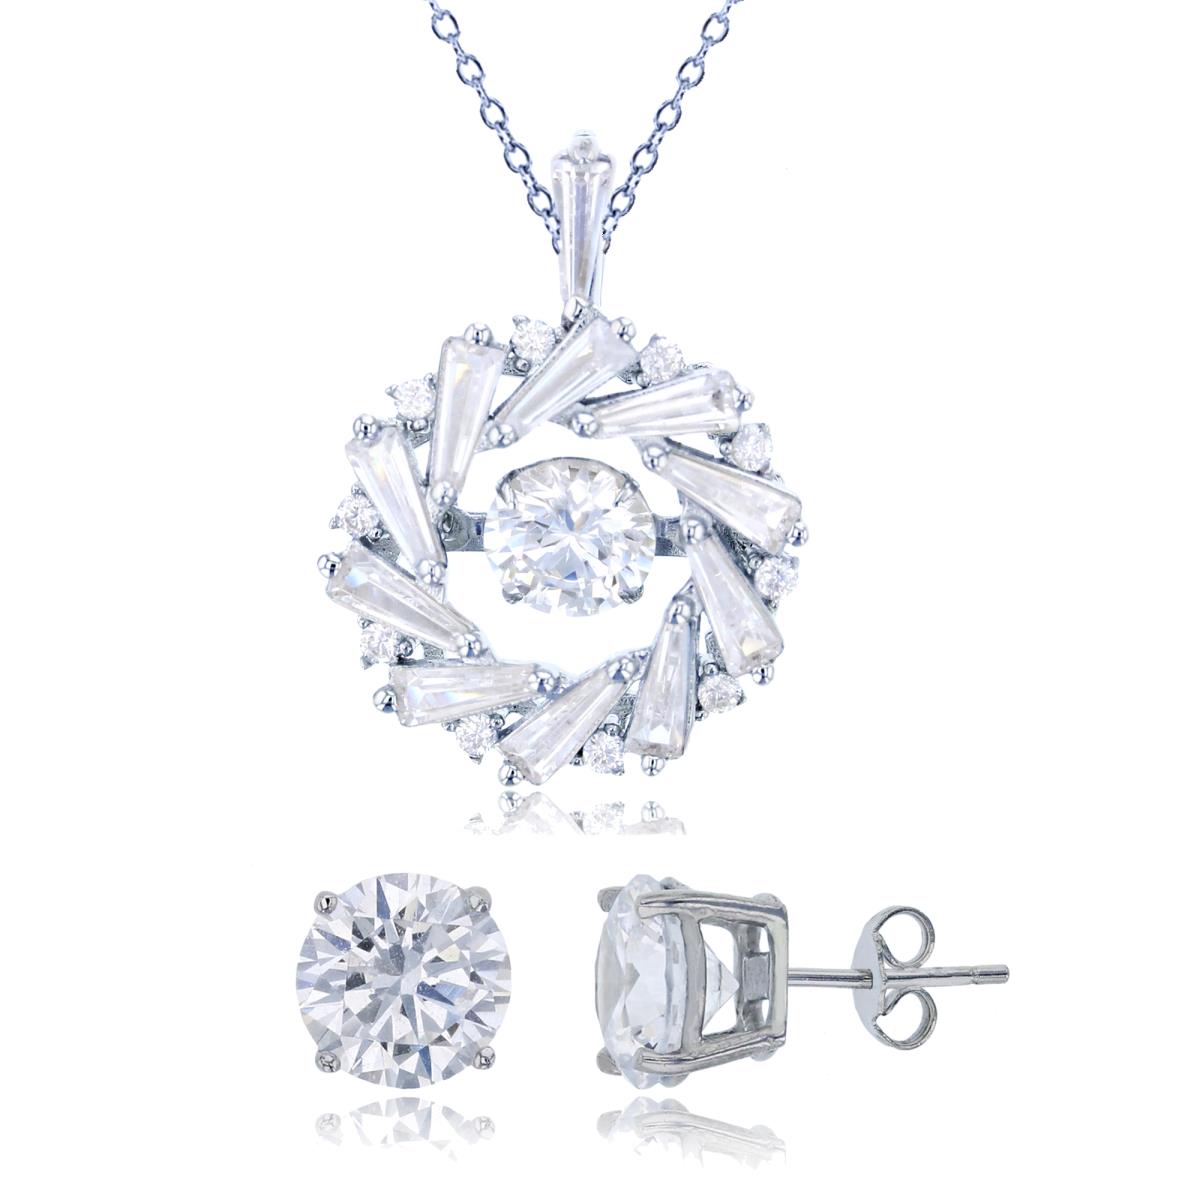 Sterling Silver Rhodium Rnd & Bgt CZ with 6mm Twinkle Setting 18" Necklace & 8mm Rd Solitaire Stud Earring Set